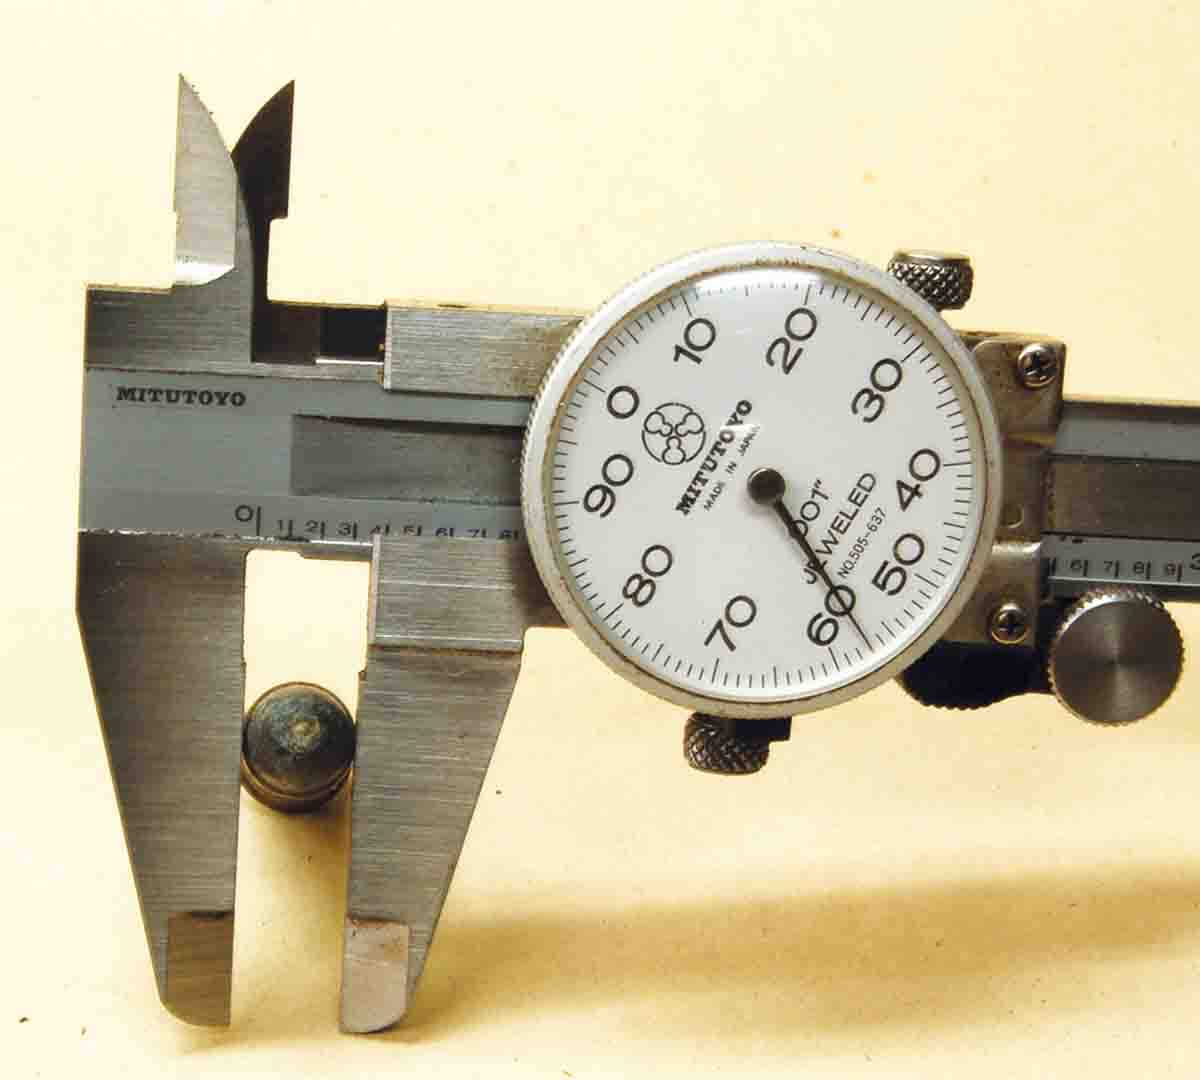 The caliper shows an inside bullet diameter of .357 inch (.35-caliber bullet) of a .38 Colt Army cartridge that would later be called a .38 Long Colt.